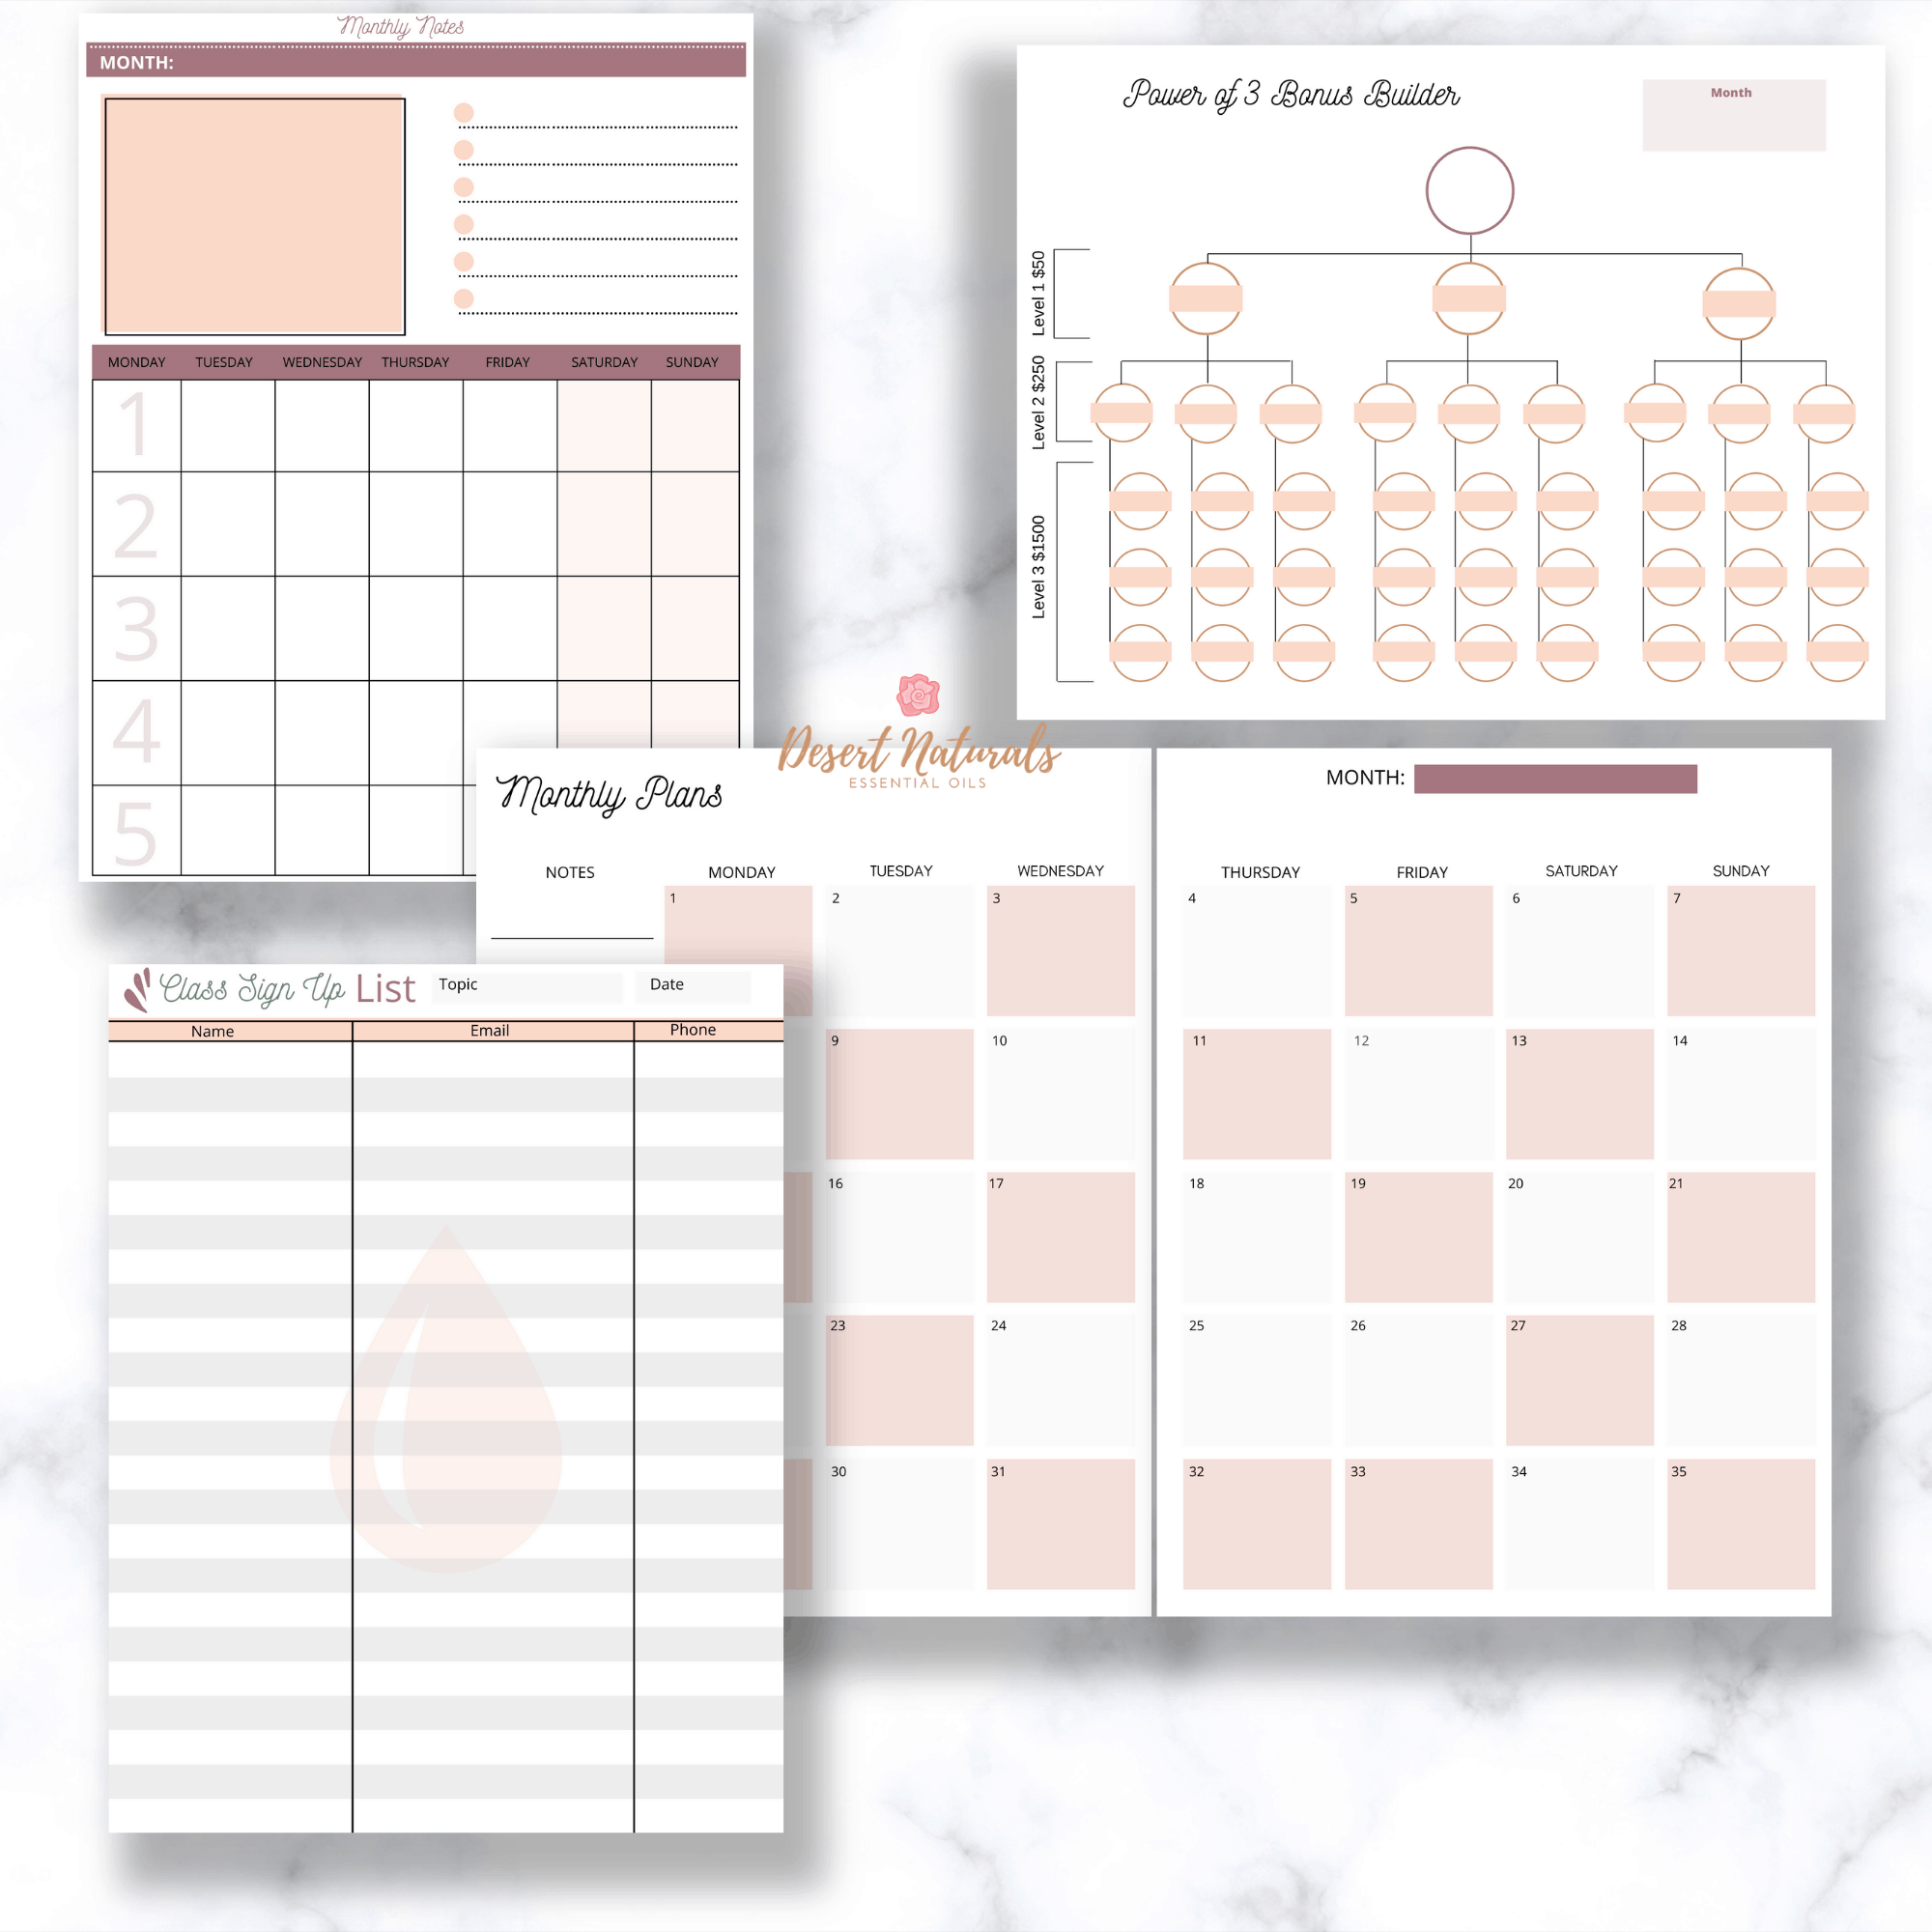 power of three bonus planner, class sign up sheet, and monthly planners from the doterra essential oil business planner and binder